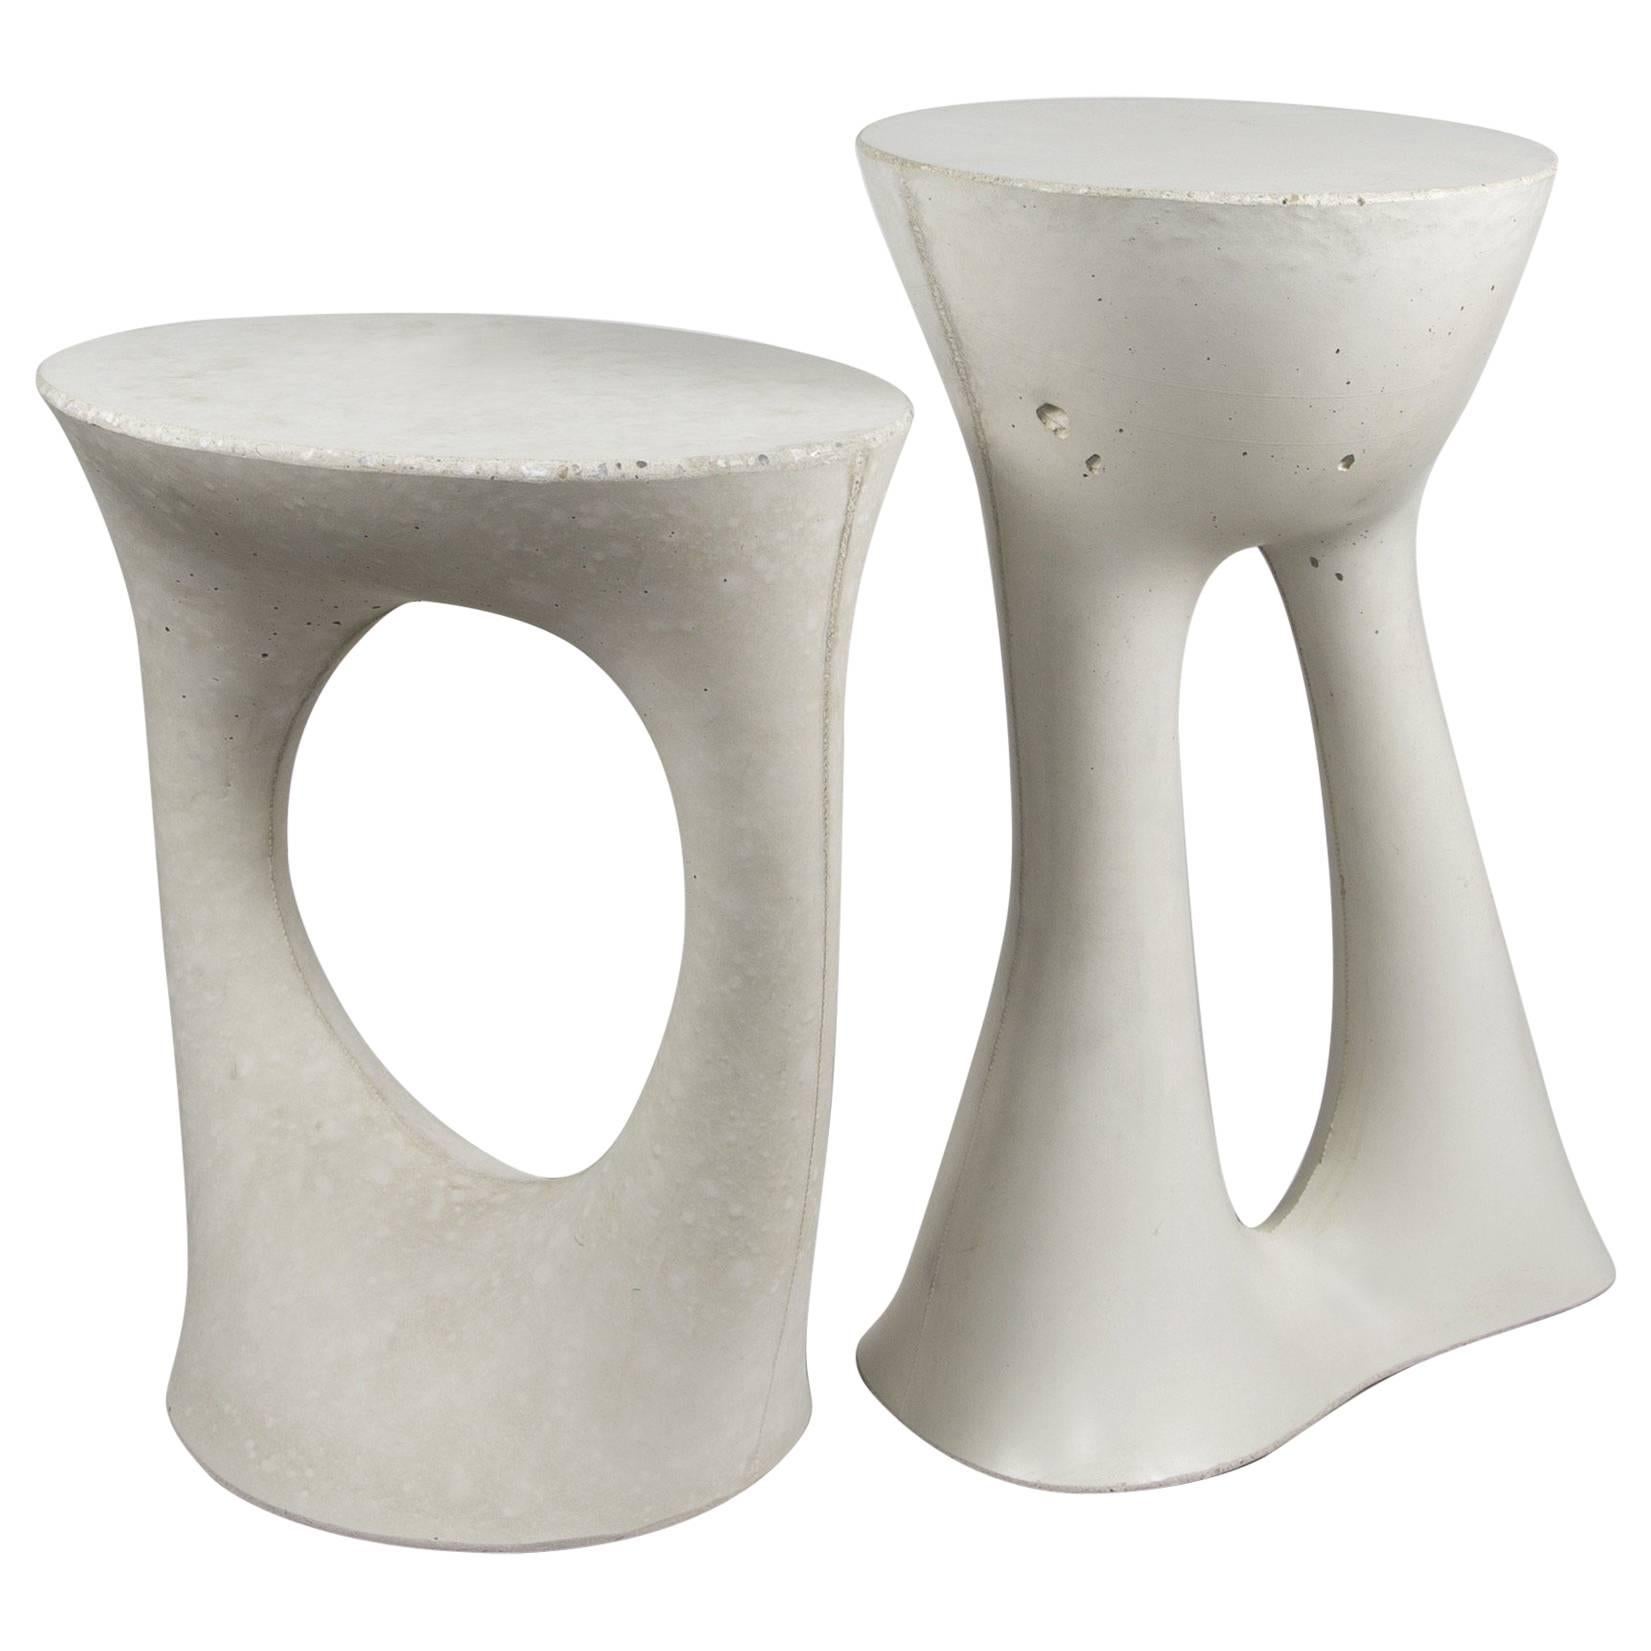 Pair of Modern Concrete Kreten Side Tables in Grey from Souda, Made to Order